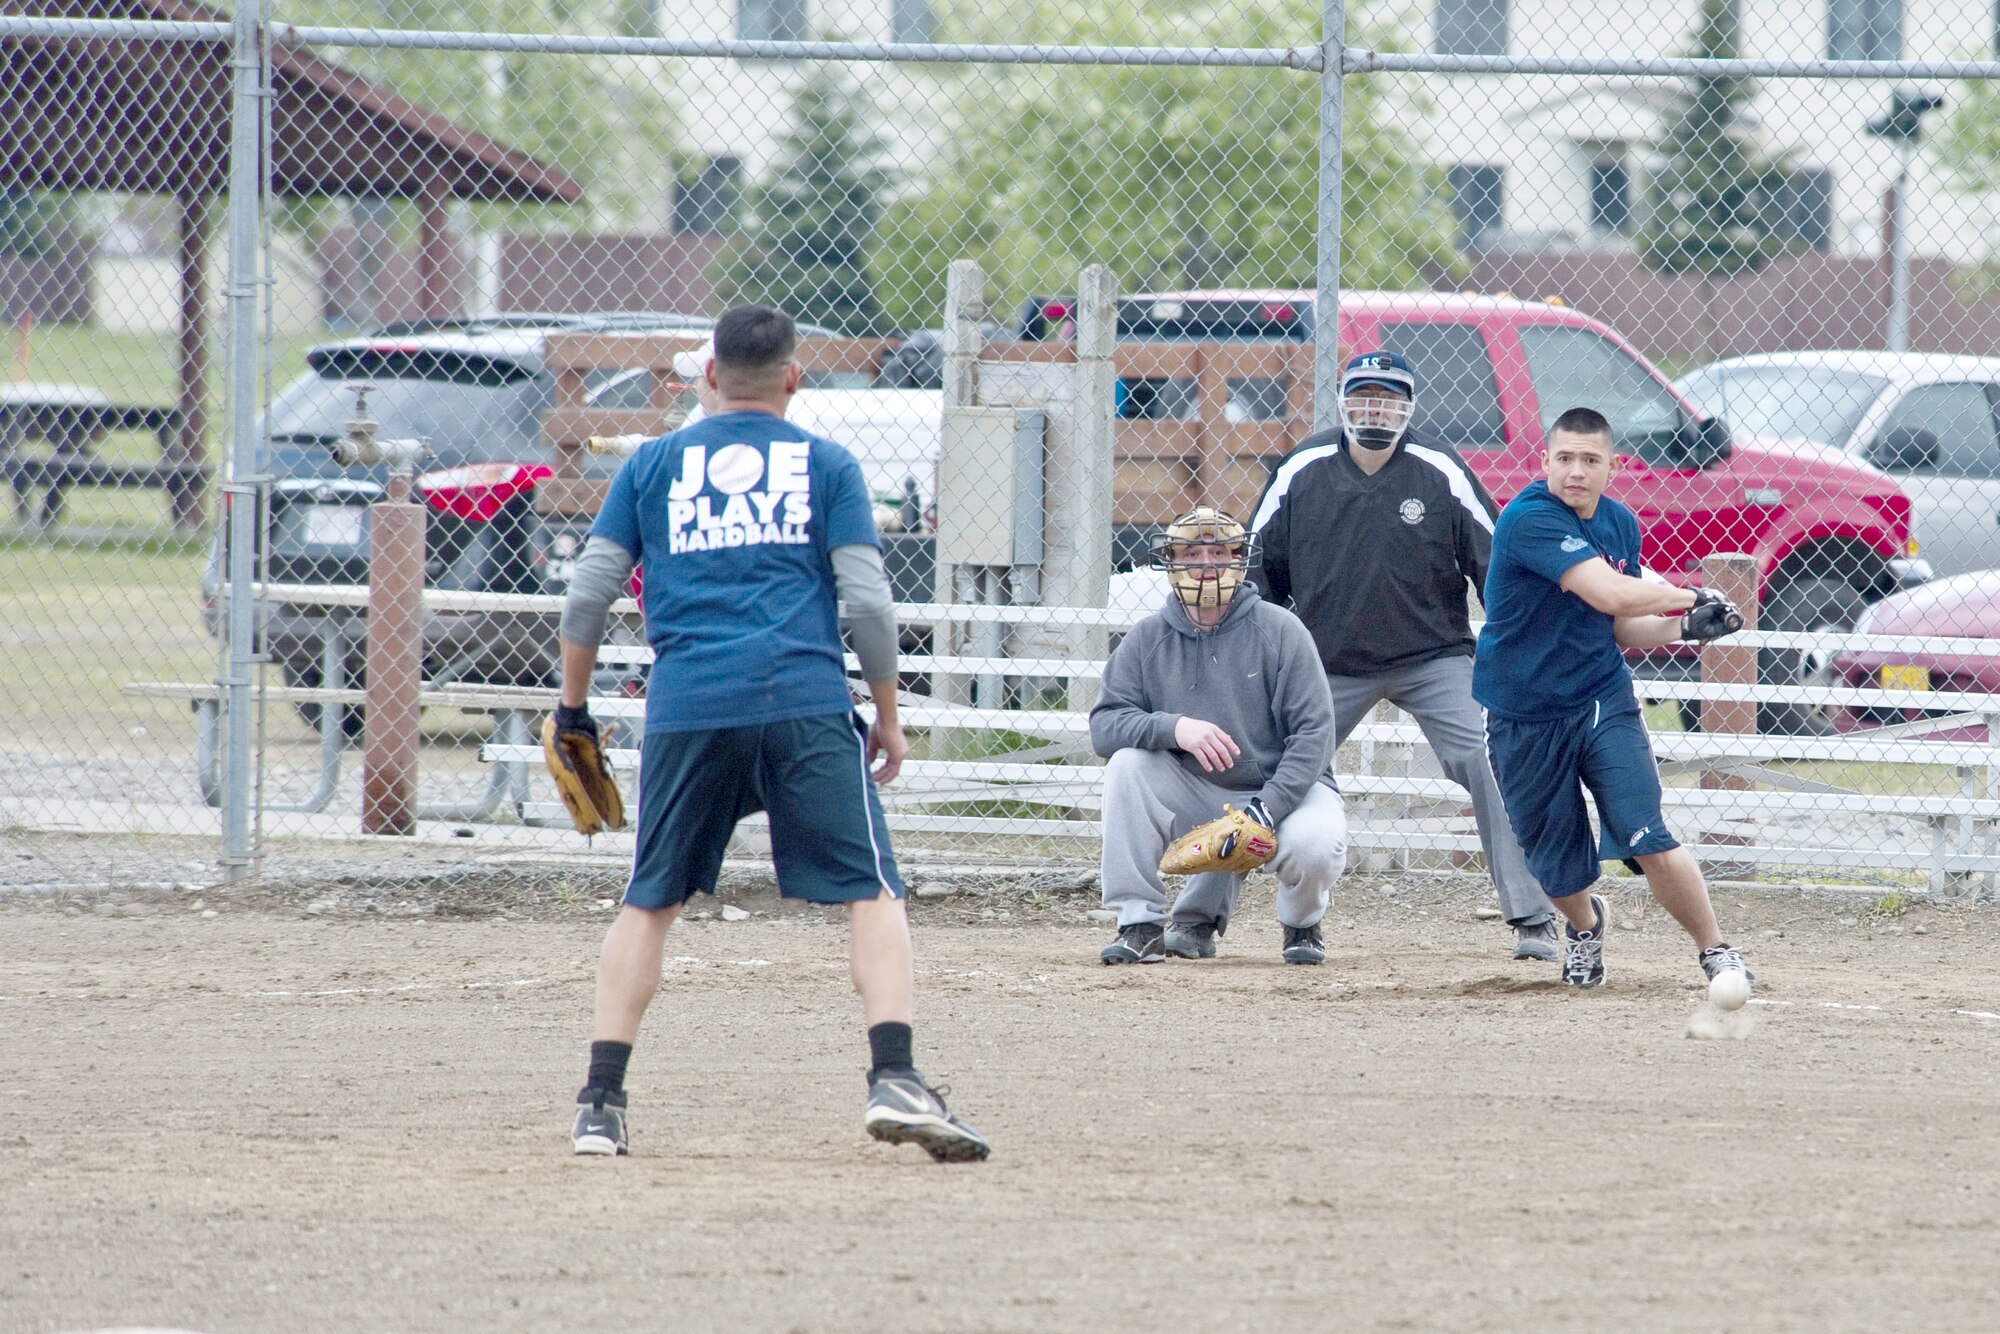 JOINT BASE ELMENDORF-RICHARDSON, Alaska ? Robert Camacho, of the 673d Force Support Squadron, hits a ball pitched by Curtis Lopez, of the 3rd Maintenance Squadron, to the left side of the field during an intramural softball game June 7. The 3rd MXS topped the 673d FSS with a score of 14 to 3 starting themselves out with a 2-0 record and leaving the FSS 0-2. (Air Force photo/Senior Airman Christopher Gross)